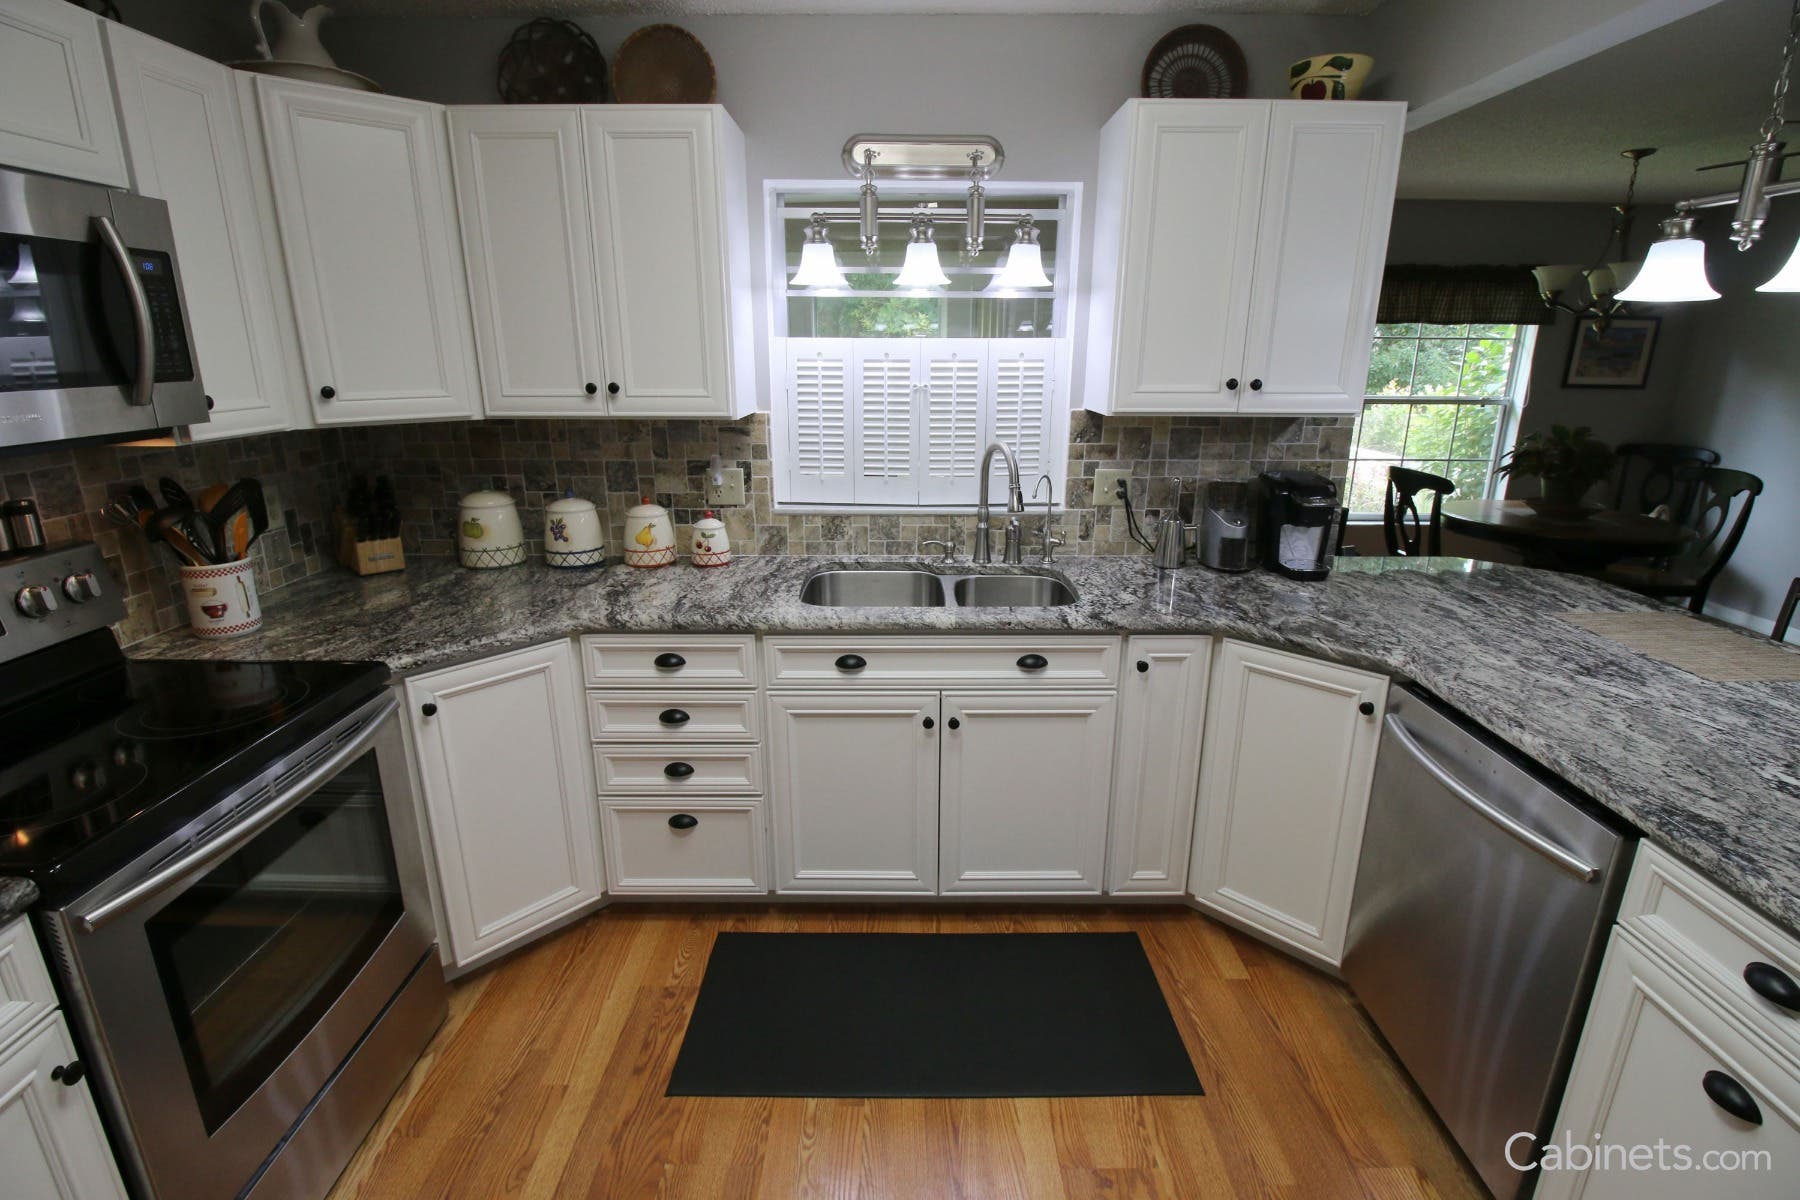 White cabinets with combination of black knobs and cups